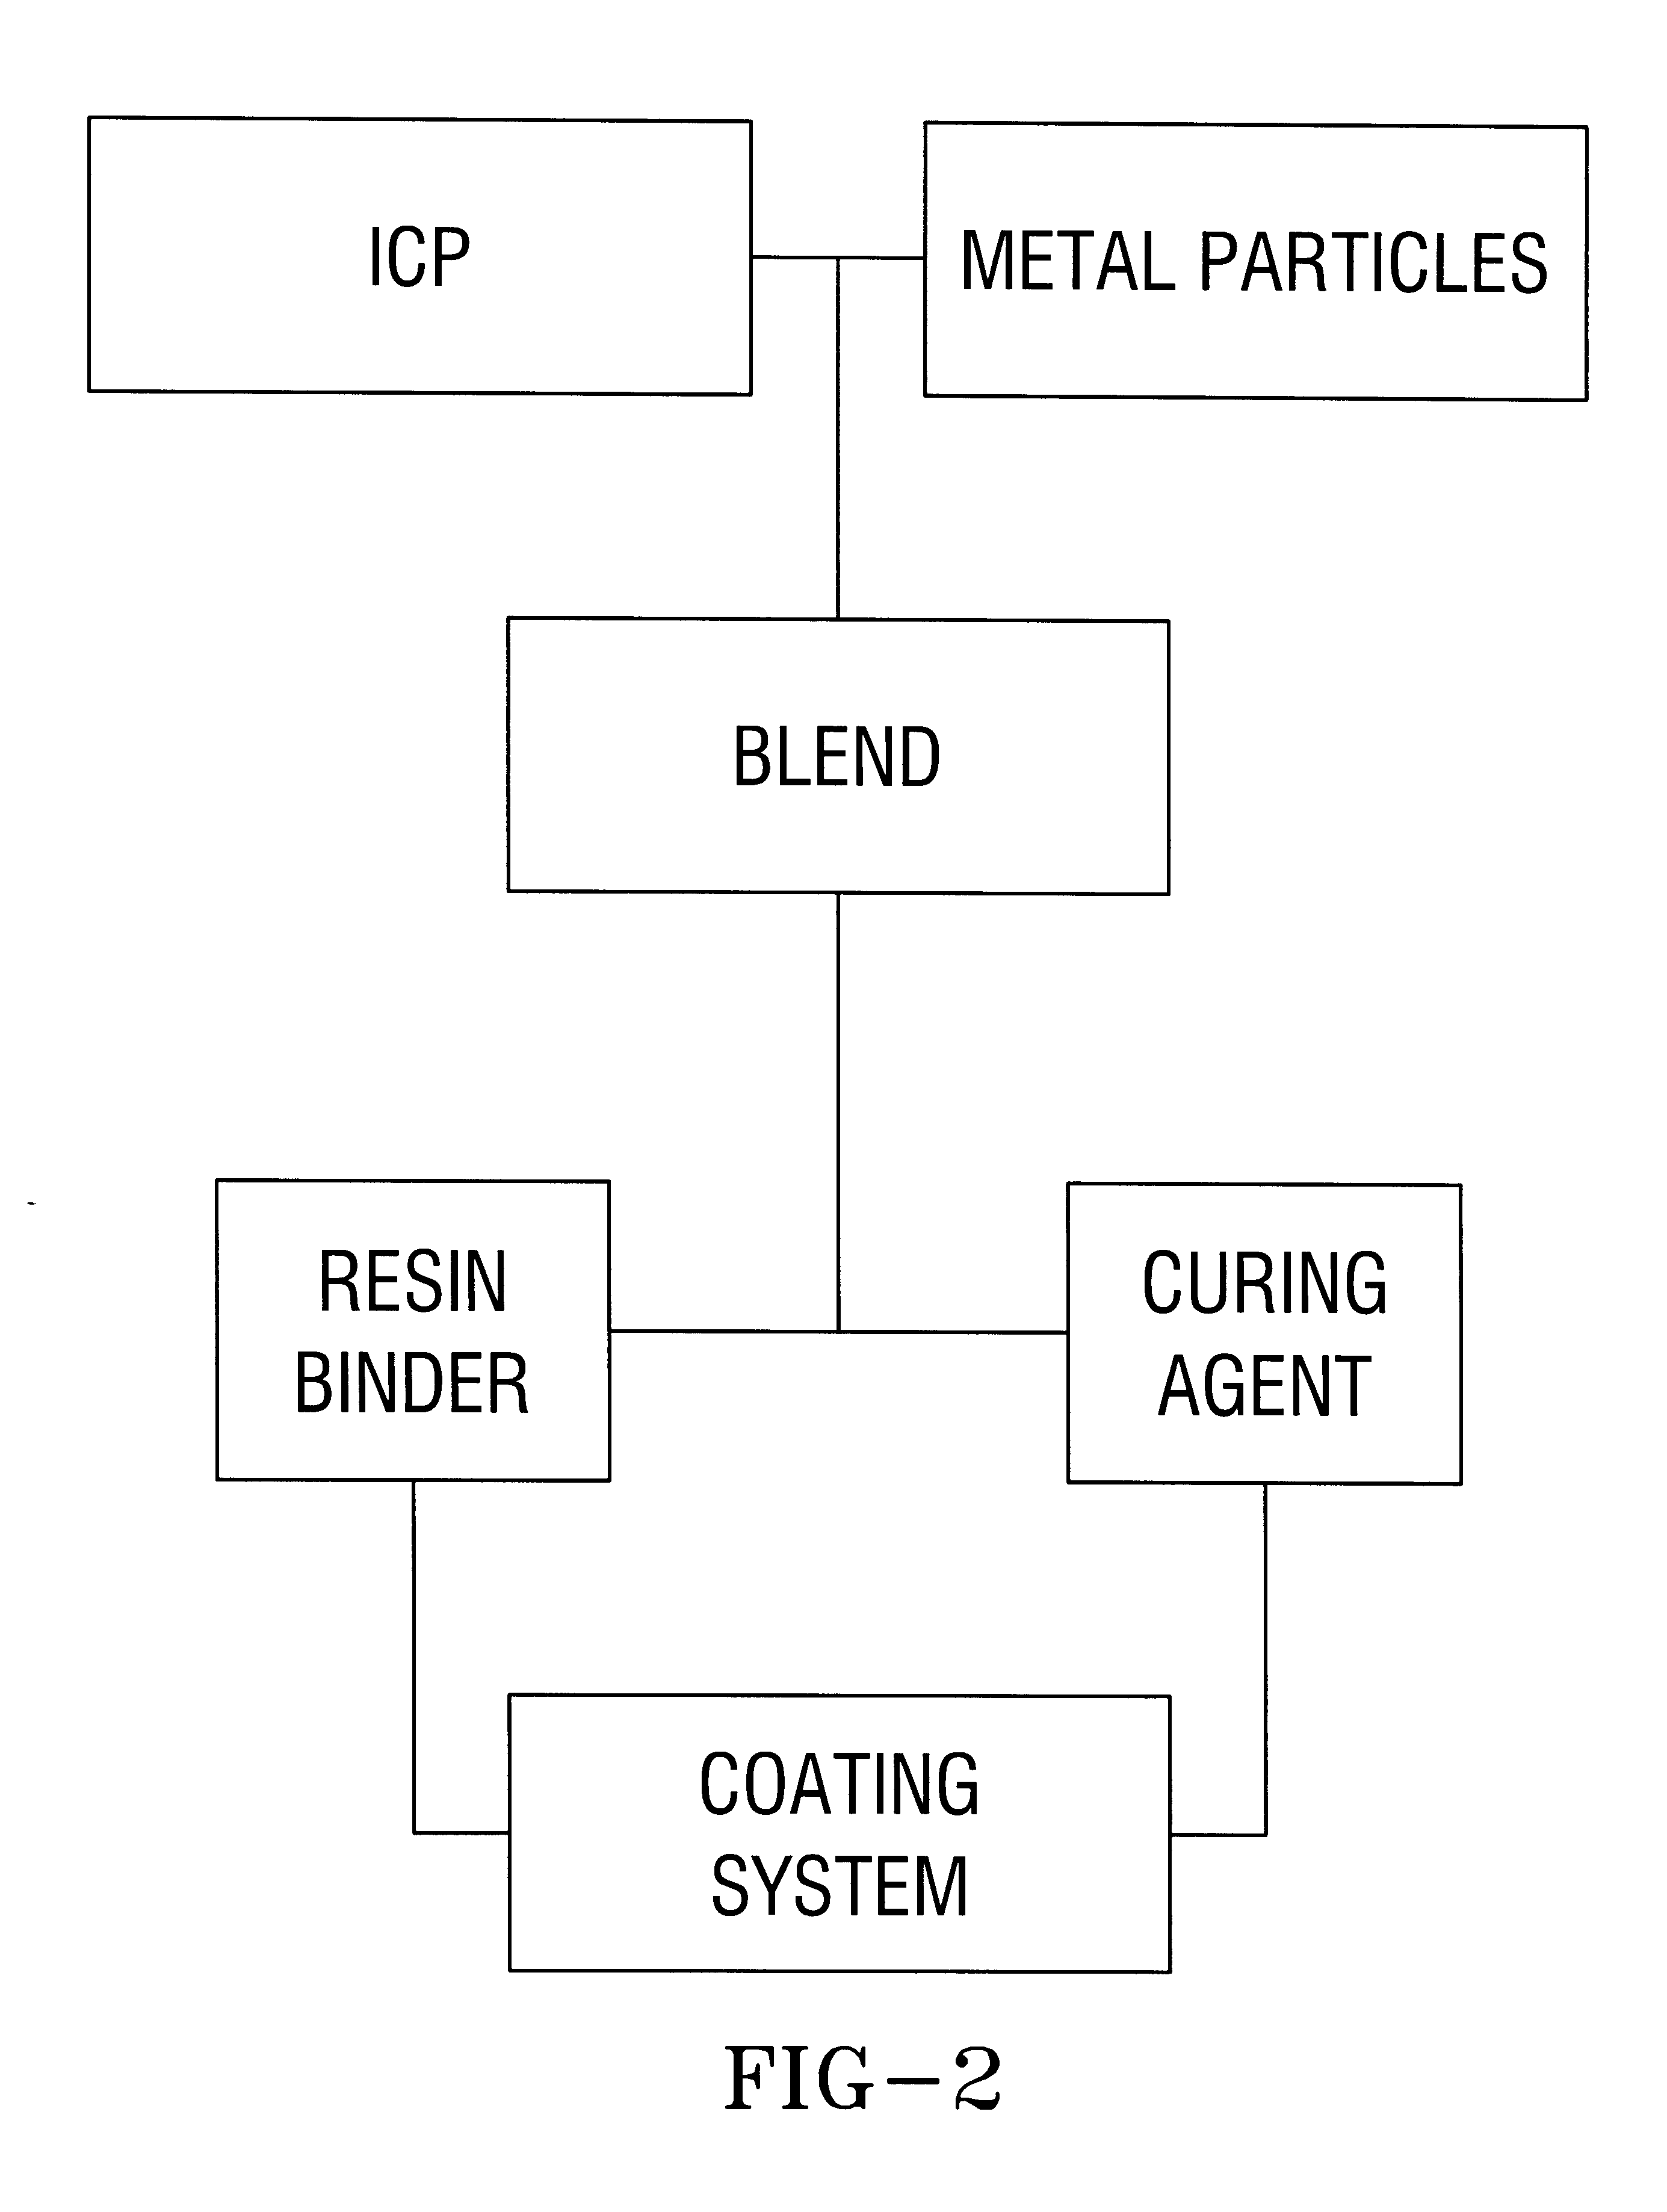 Method for applying a coating that acts as an electrolytic barrier and a cathodic corrosion prevention system